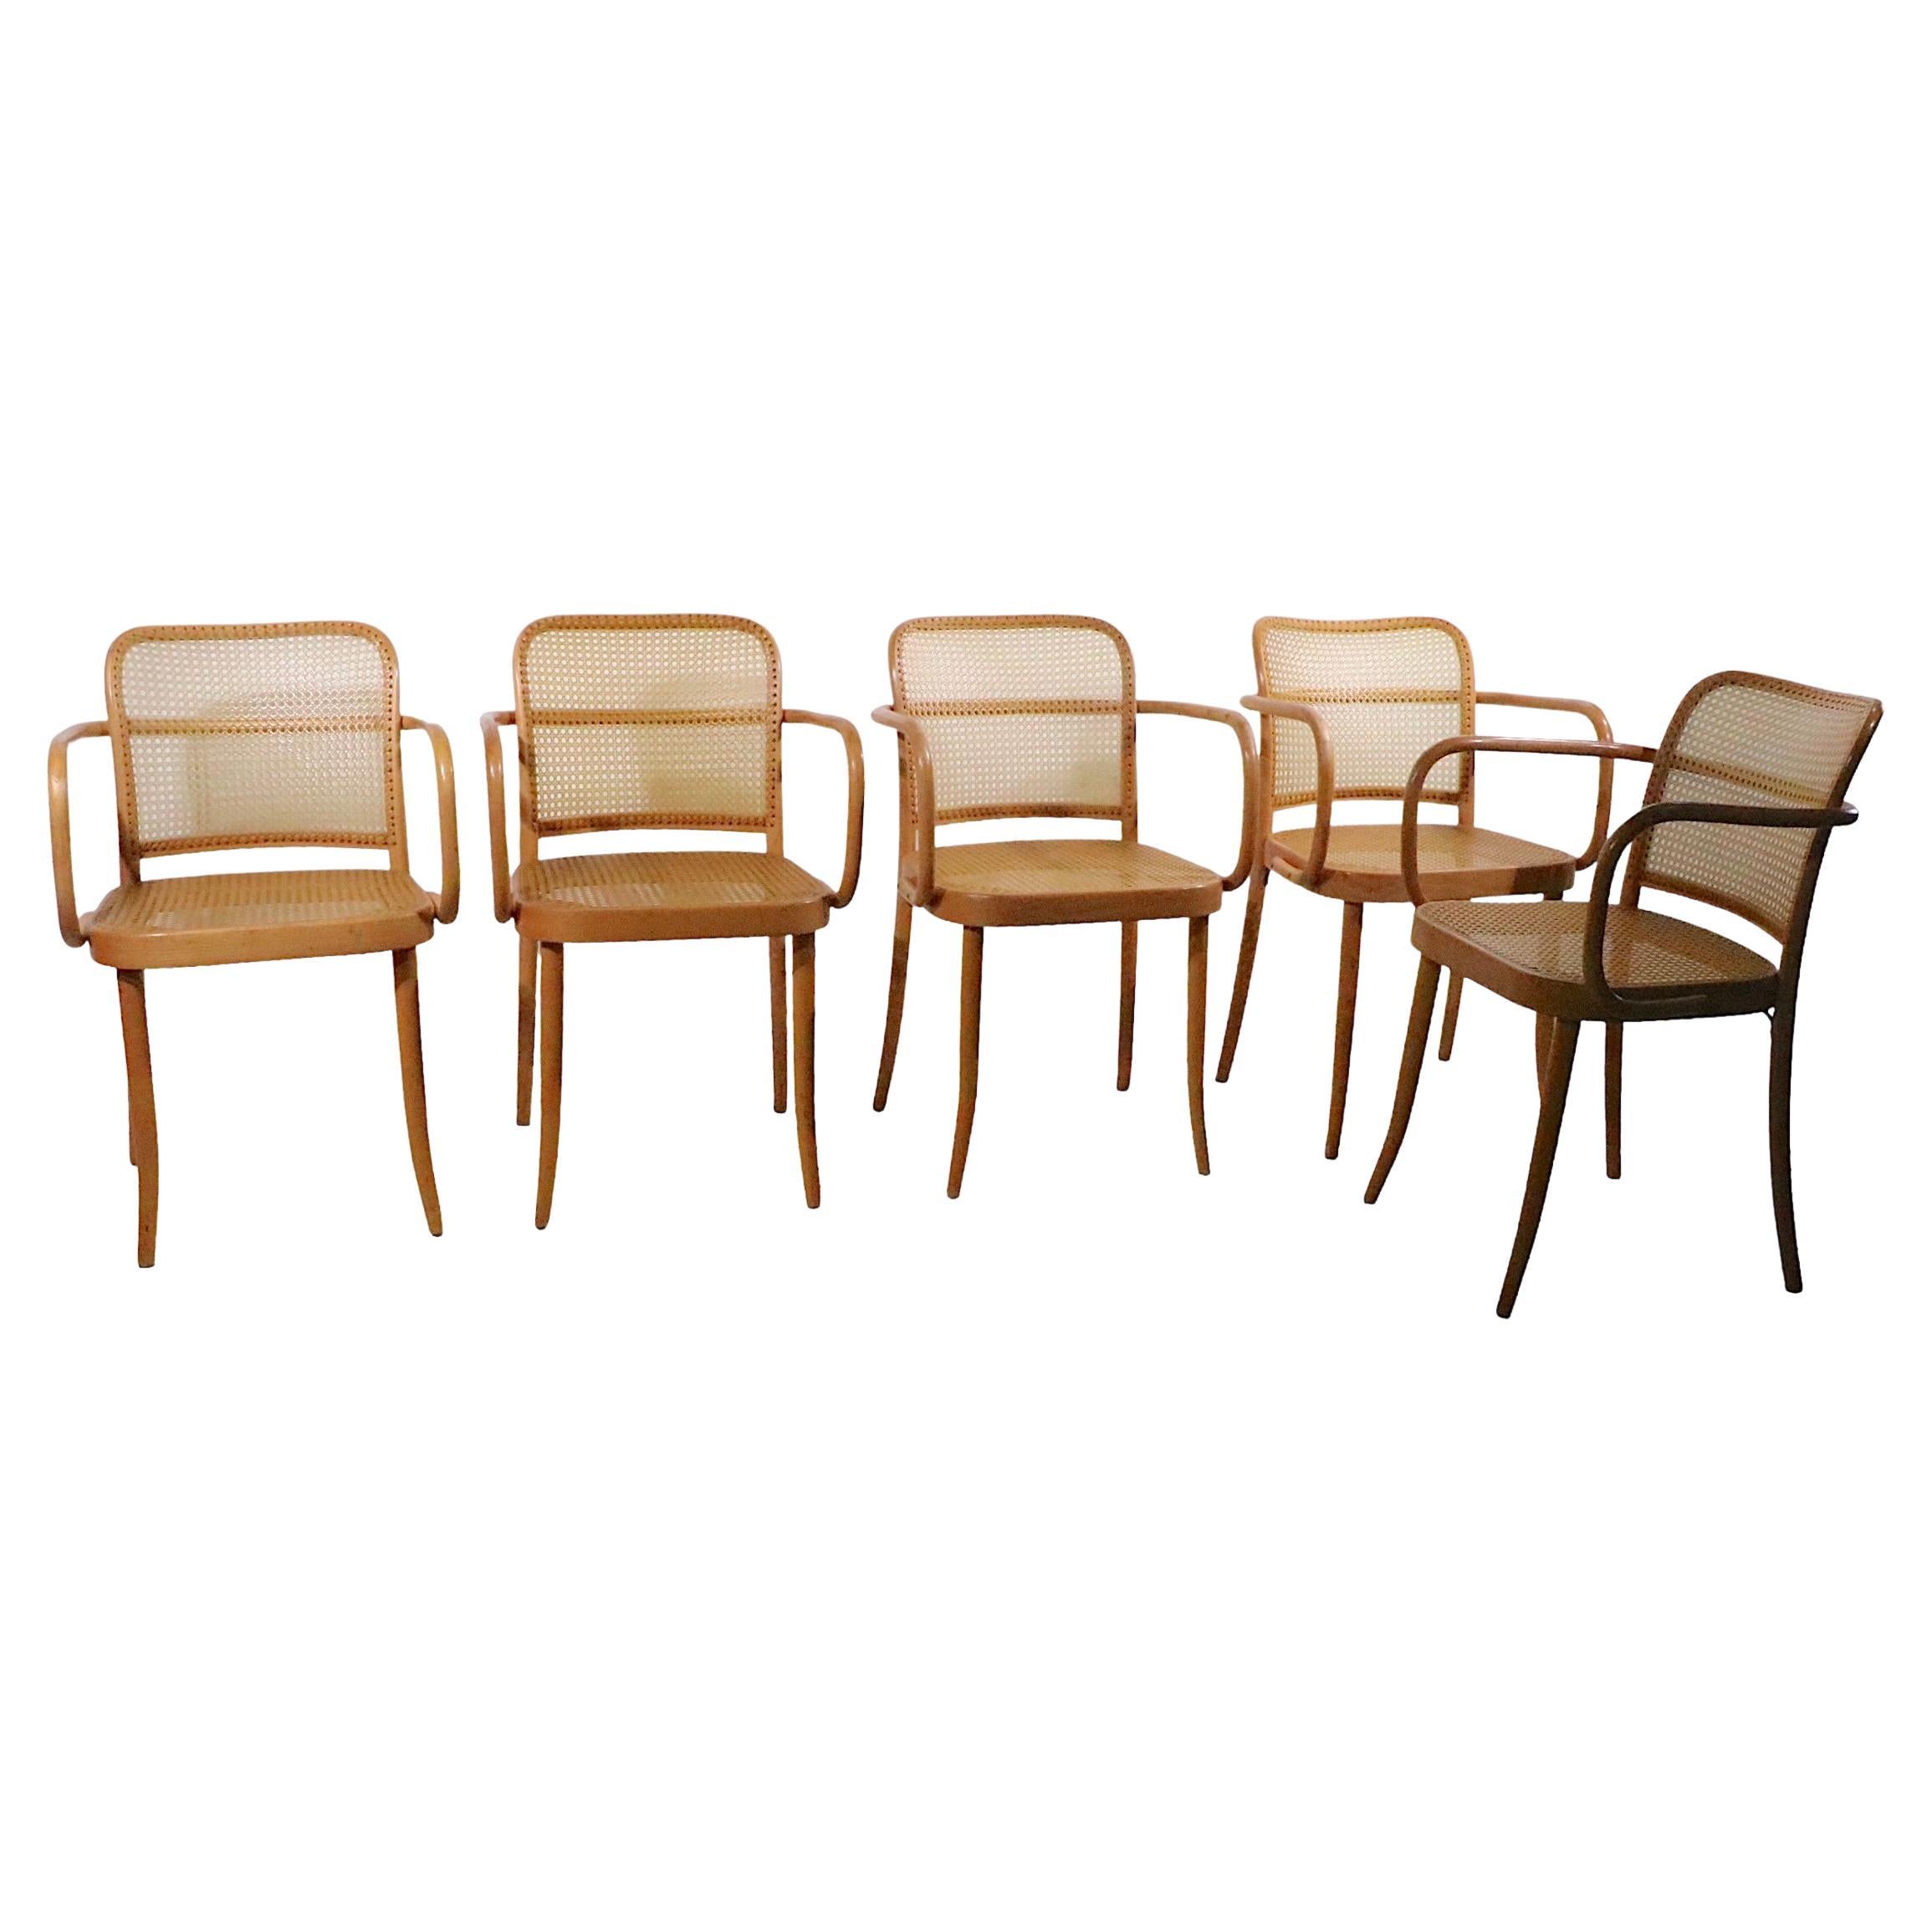 Set of 5 Josef Frank Prague Chairs Made in Czechoslovakia, circa 1970s For Sale